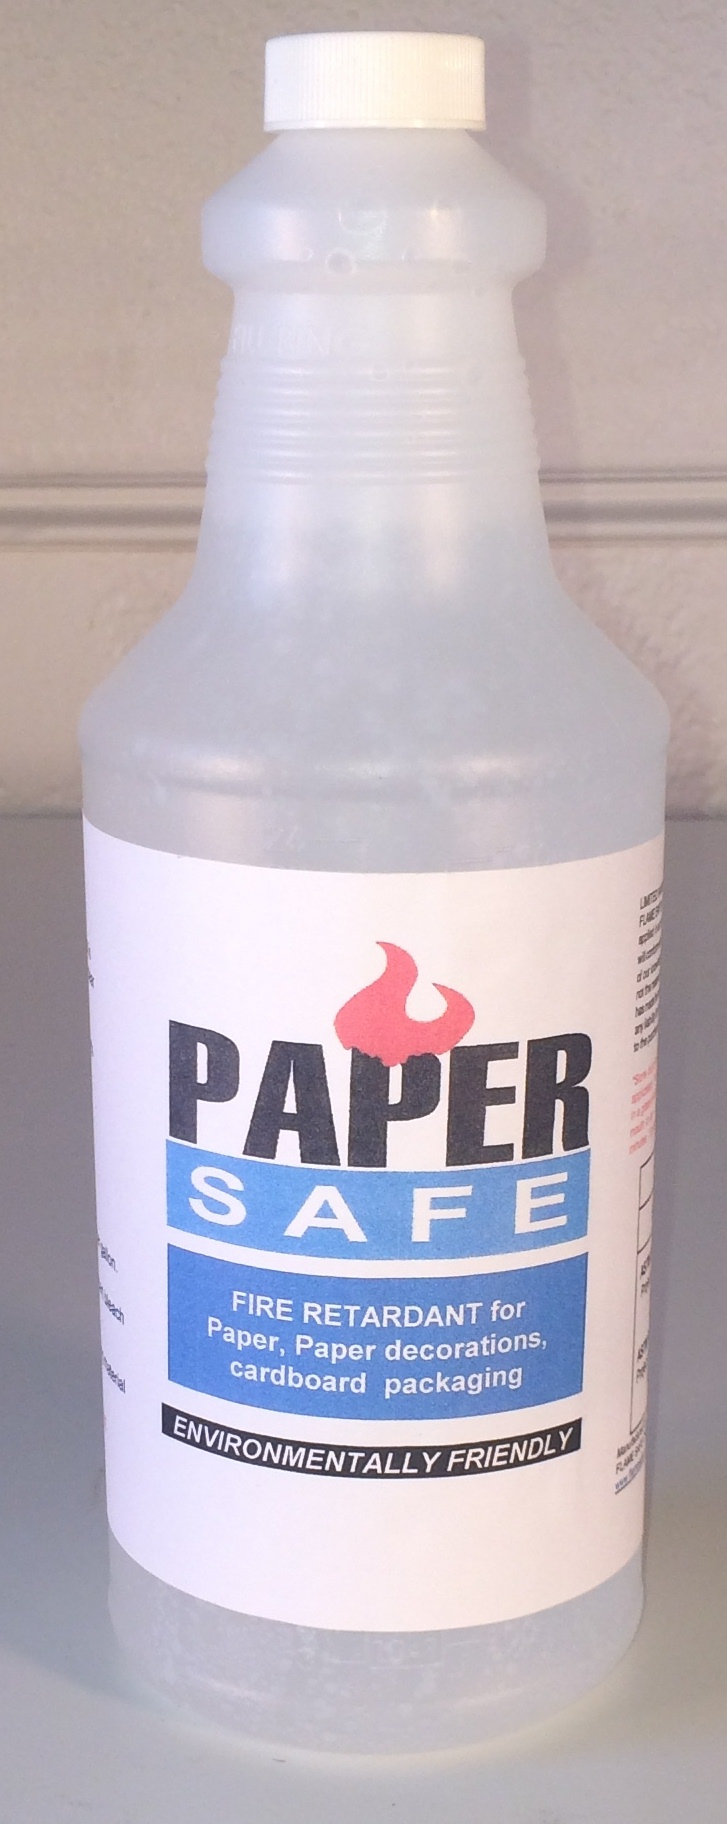 Paper Safe fire retardand for paper, paper decorations and cardboard